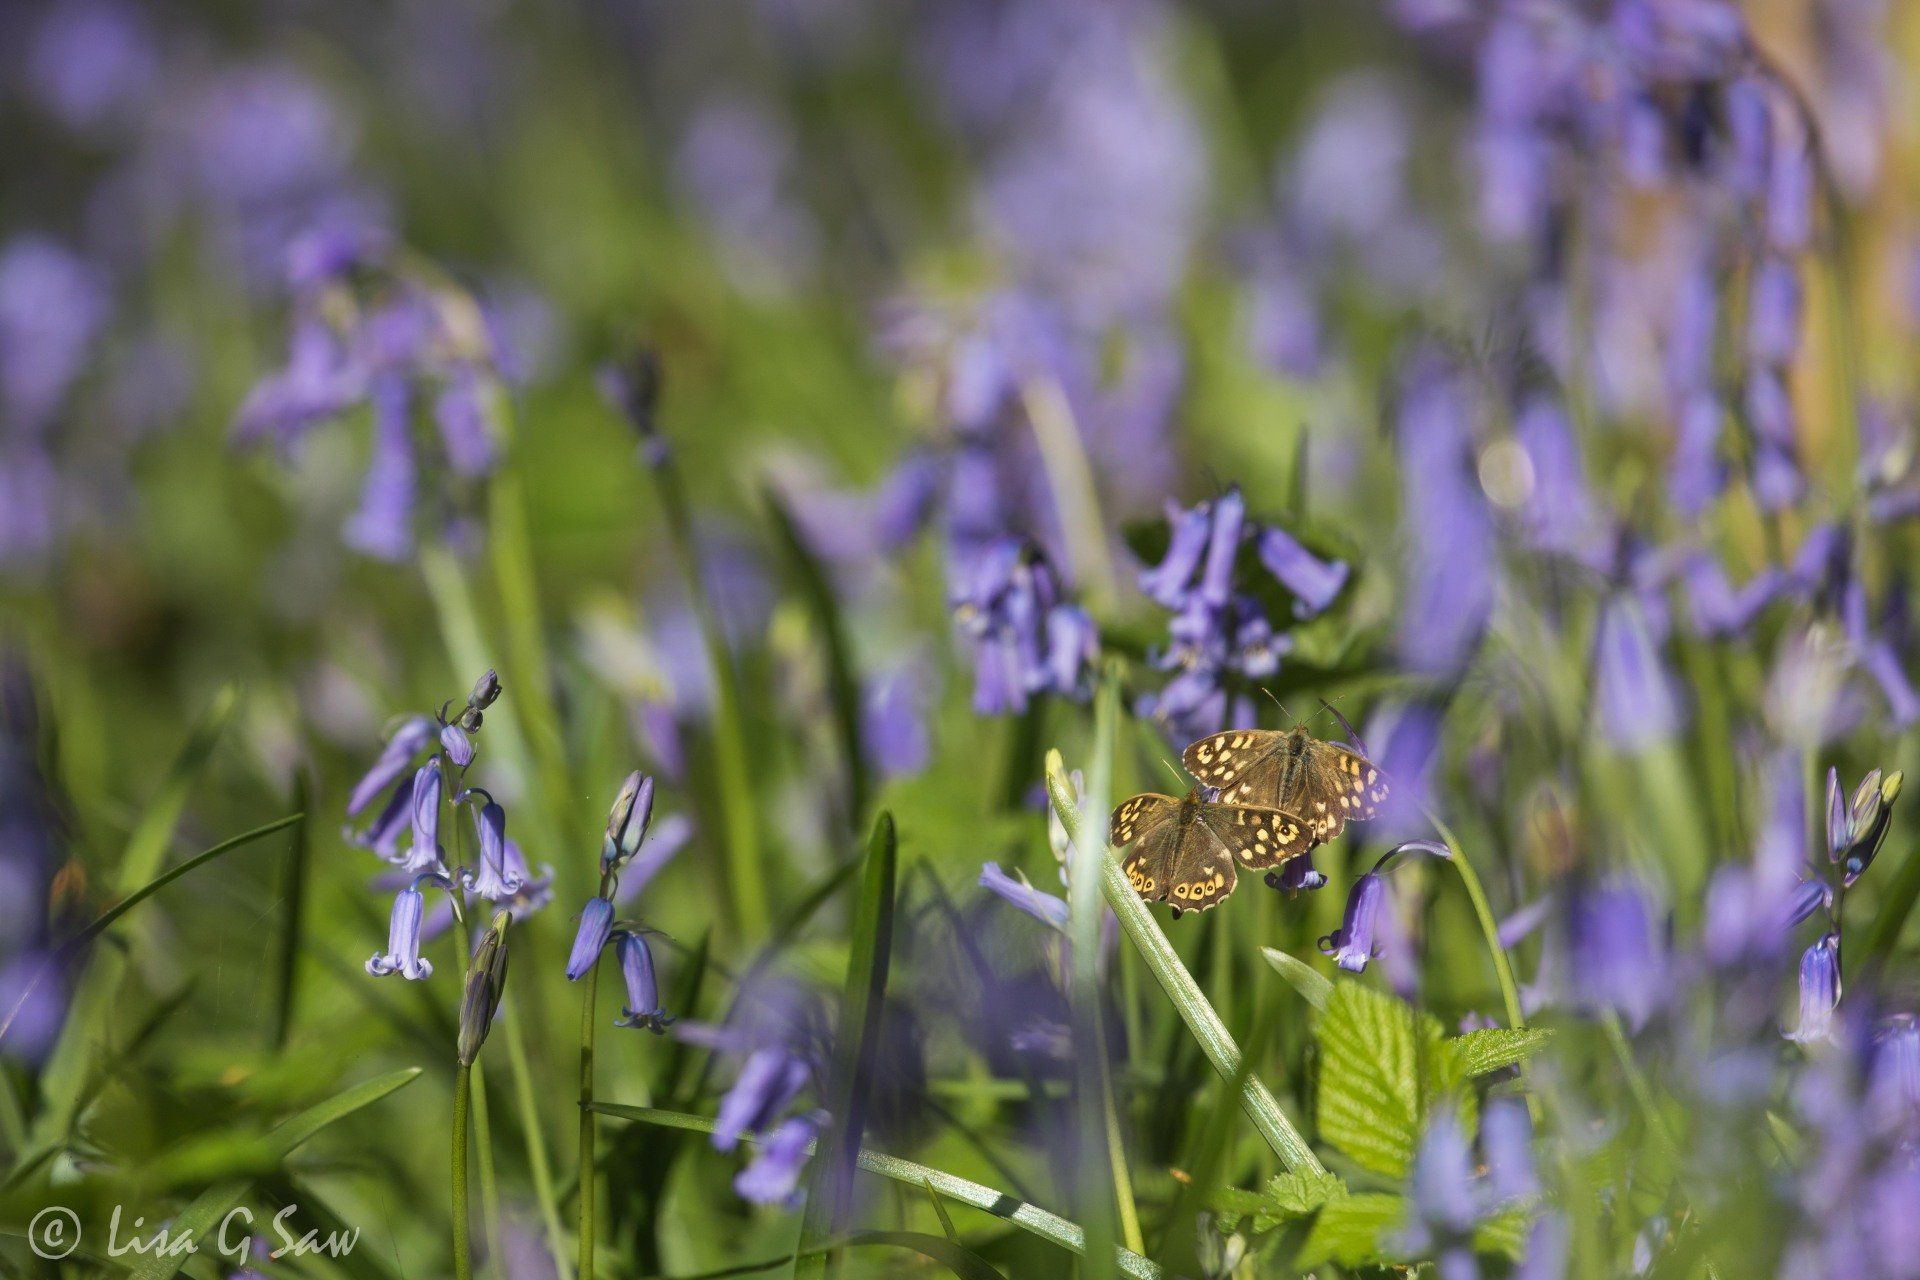 Two Speckled Wood butterflies on bluebells